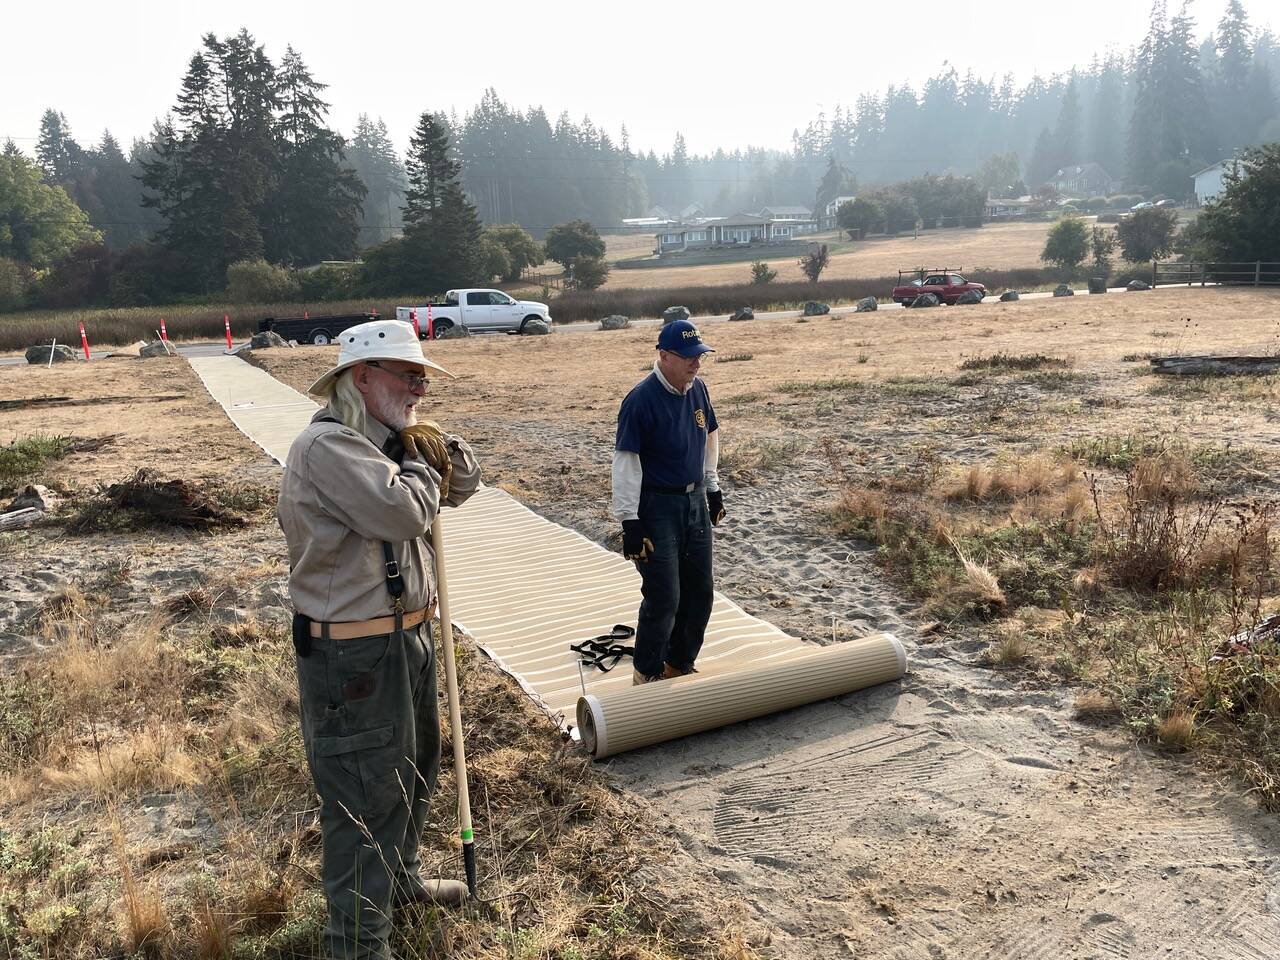 Photo provided
PaulBen McElwain of Island Beach Access and Jim Rogers of Rotary Club of Whidbey Westside roll out the new mats at Robinson Beach in Freeland.